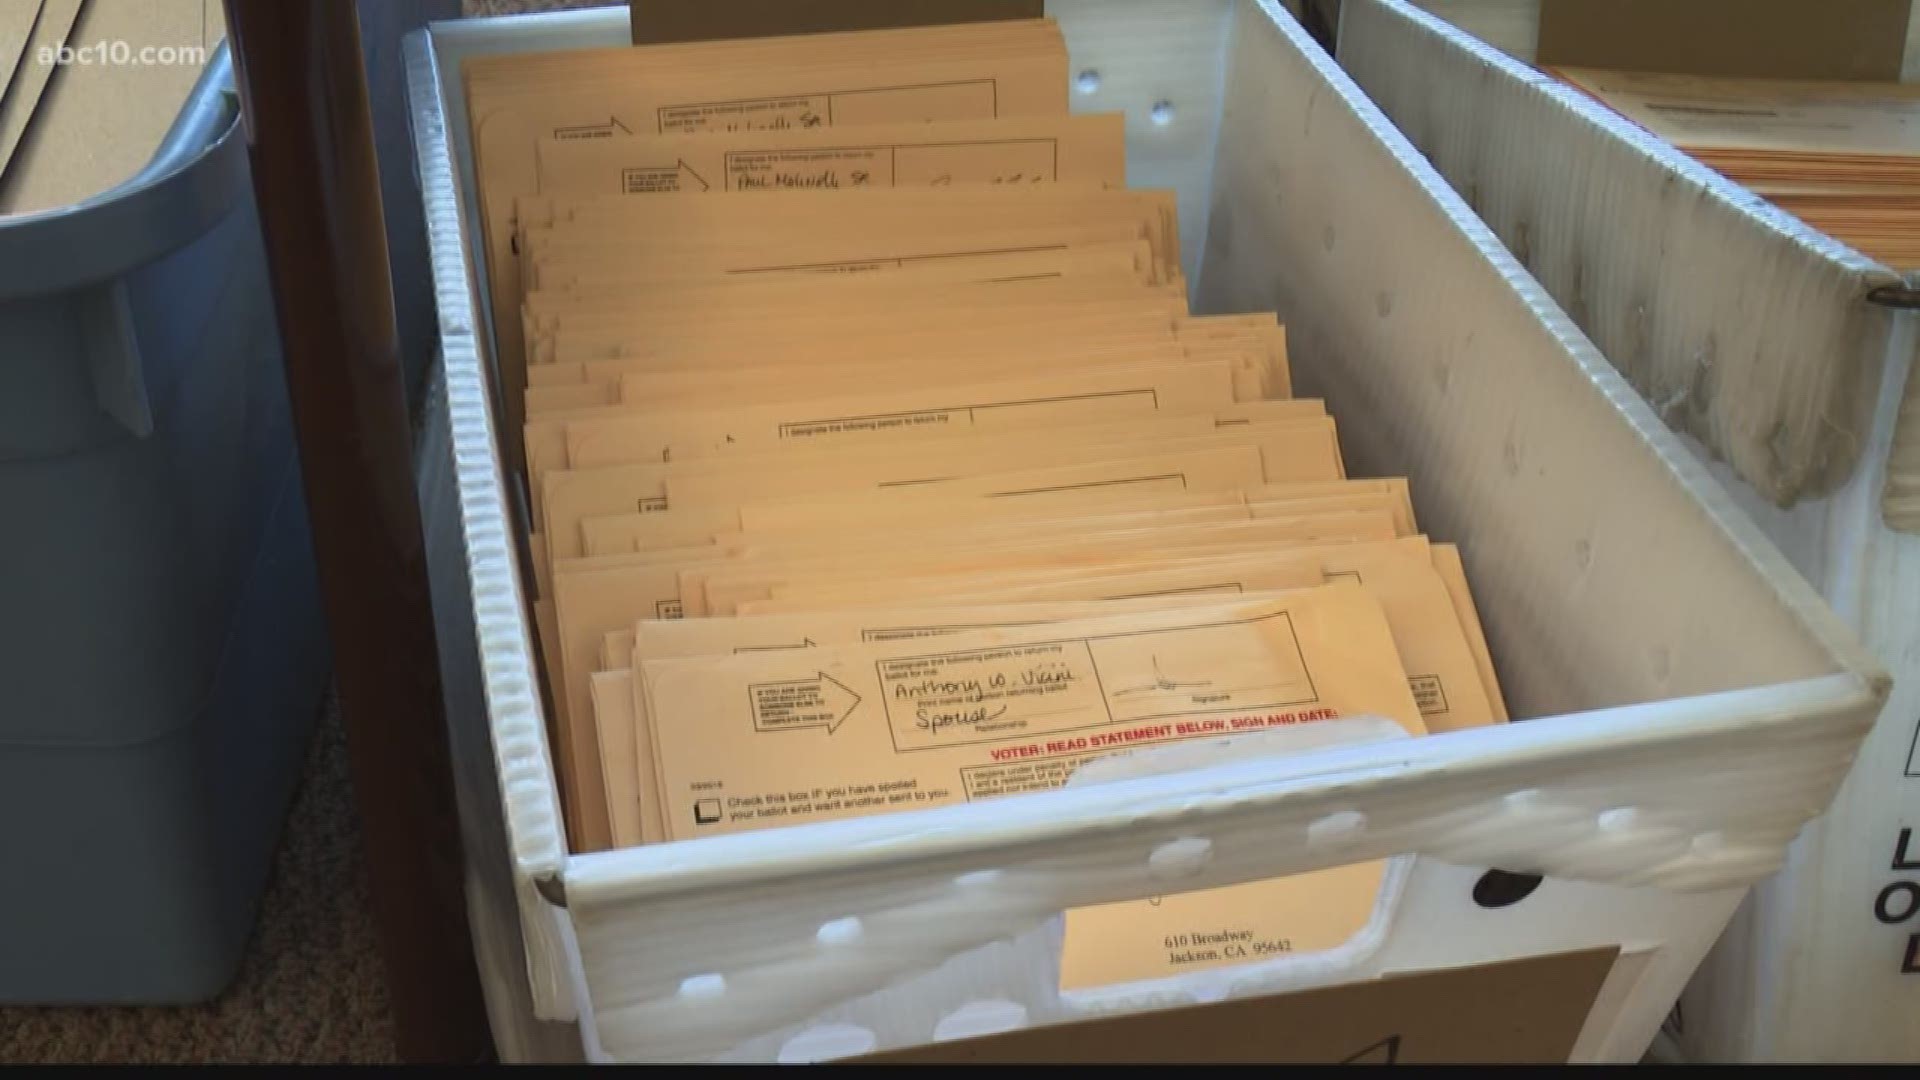 Some Amador County voters arrived at polling places to vote in the primary election to find insufficient supplies of official ballots. However, ballot workers worked around the problem and made sure those who turned out to vote could do so.